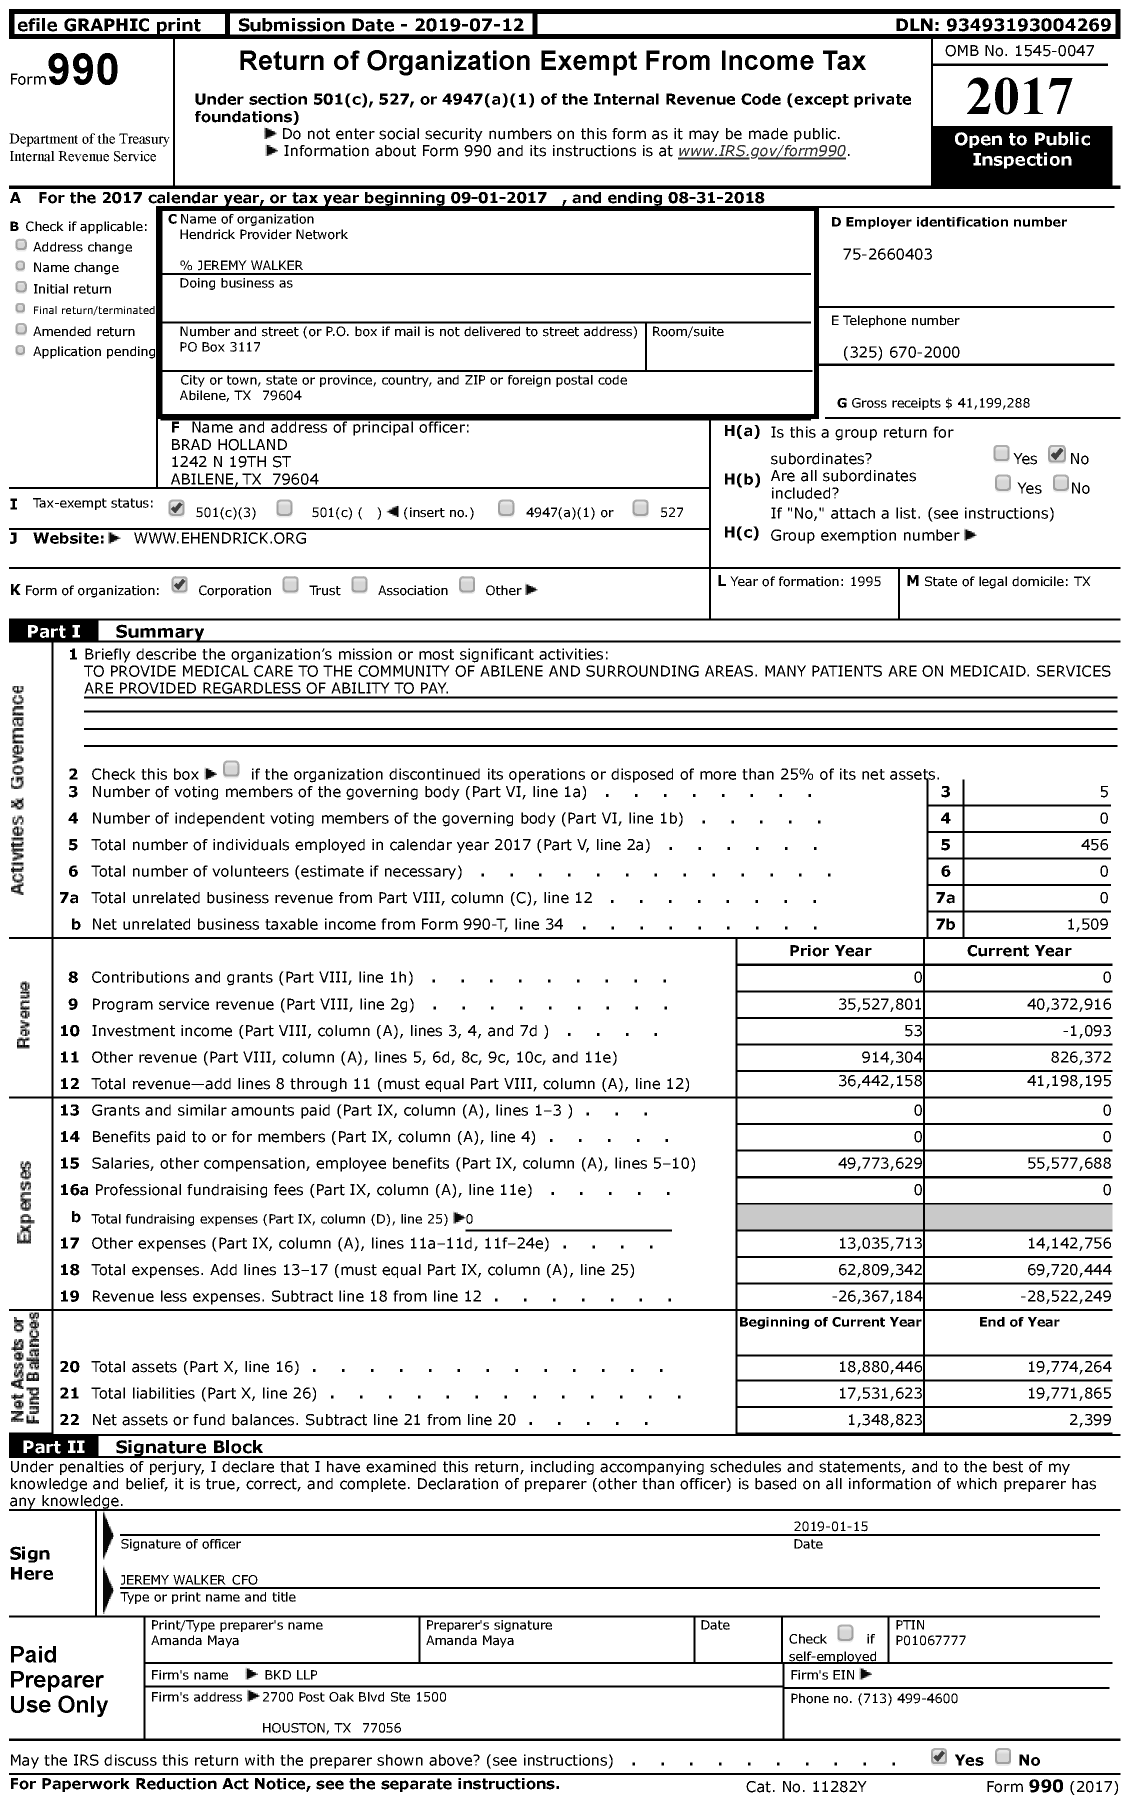 Image of first page of 2017 Form 990 for Hendrick Provider Network